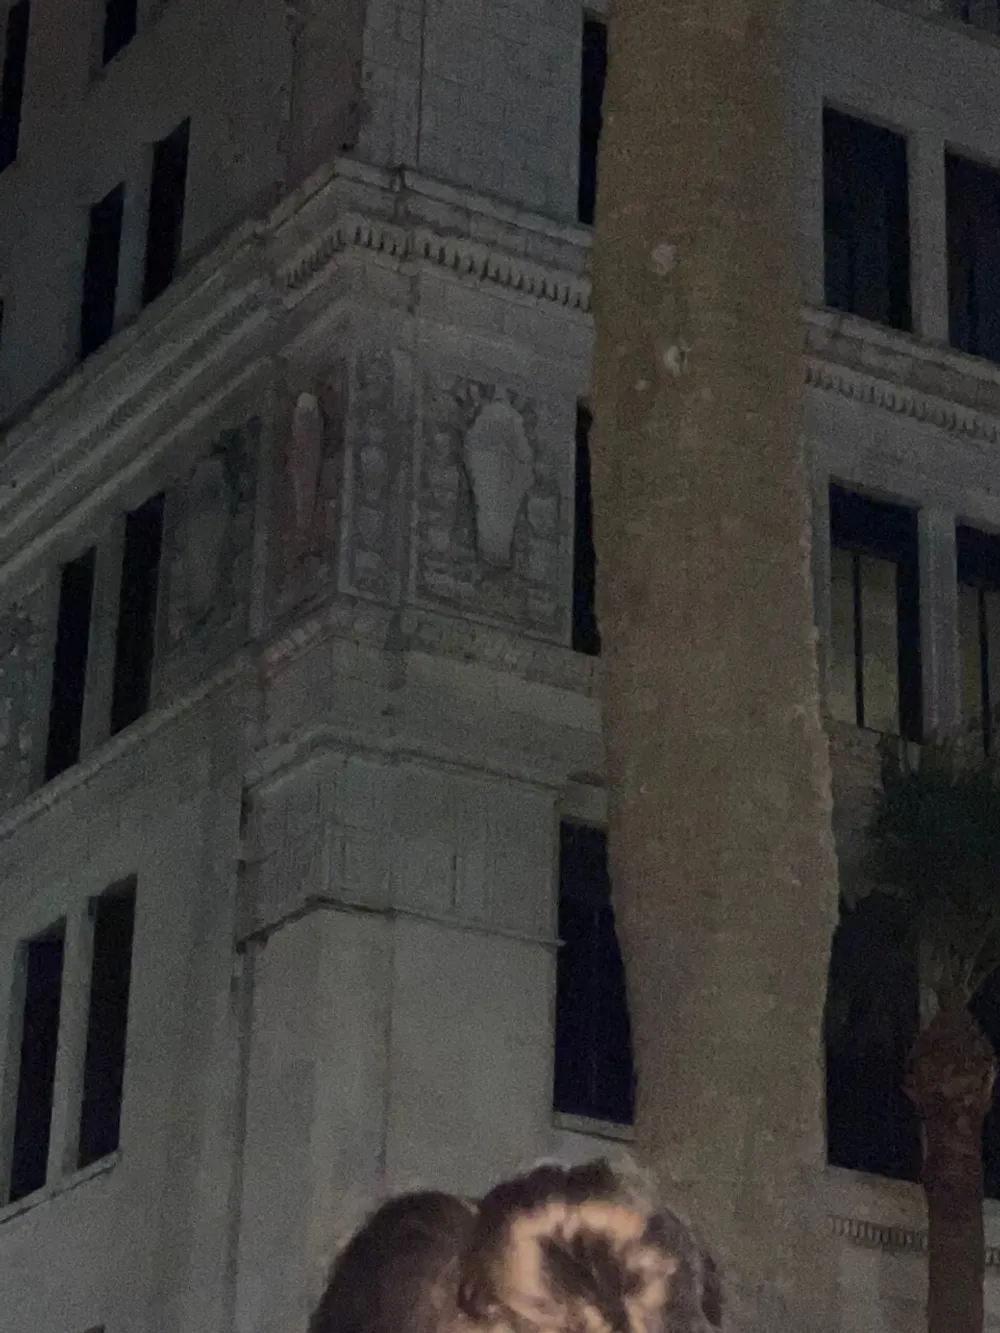 The image captures the corner of a building at night with architectural details and sculptural reliefs visible taken from a low angle where the silhouette of a persons head is seen in the bottom of the frame